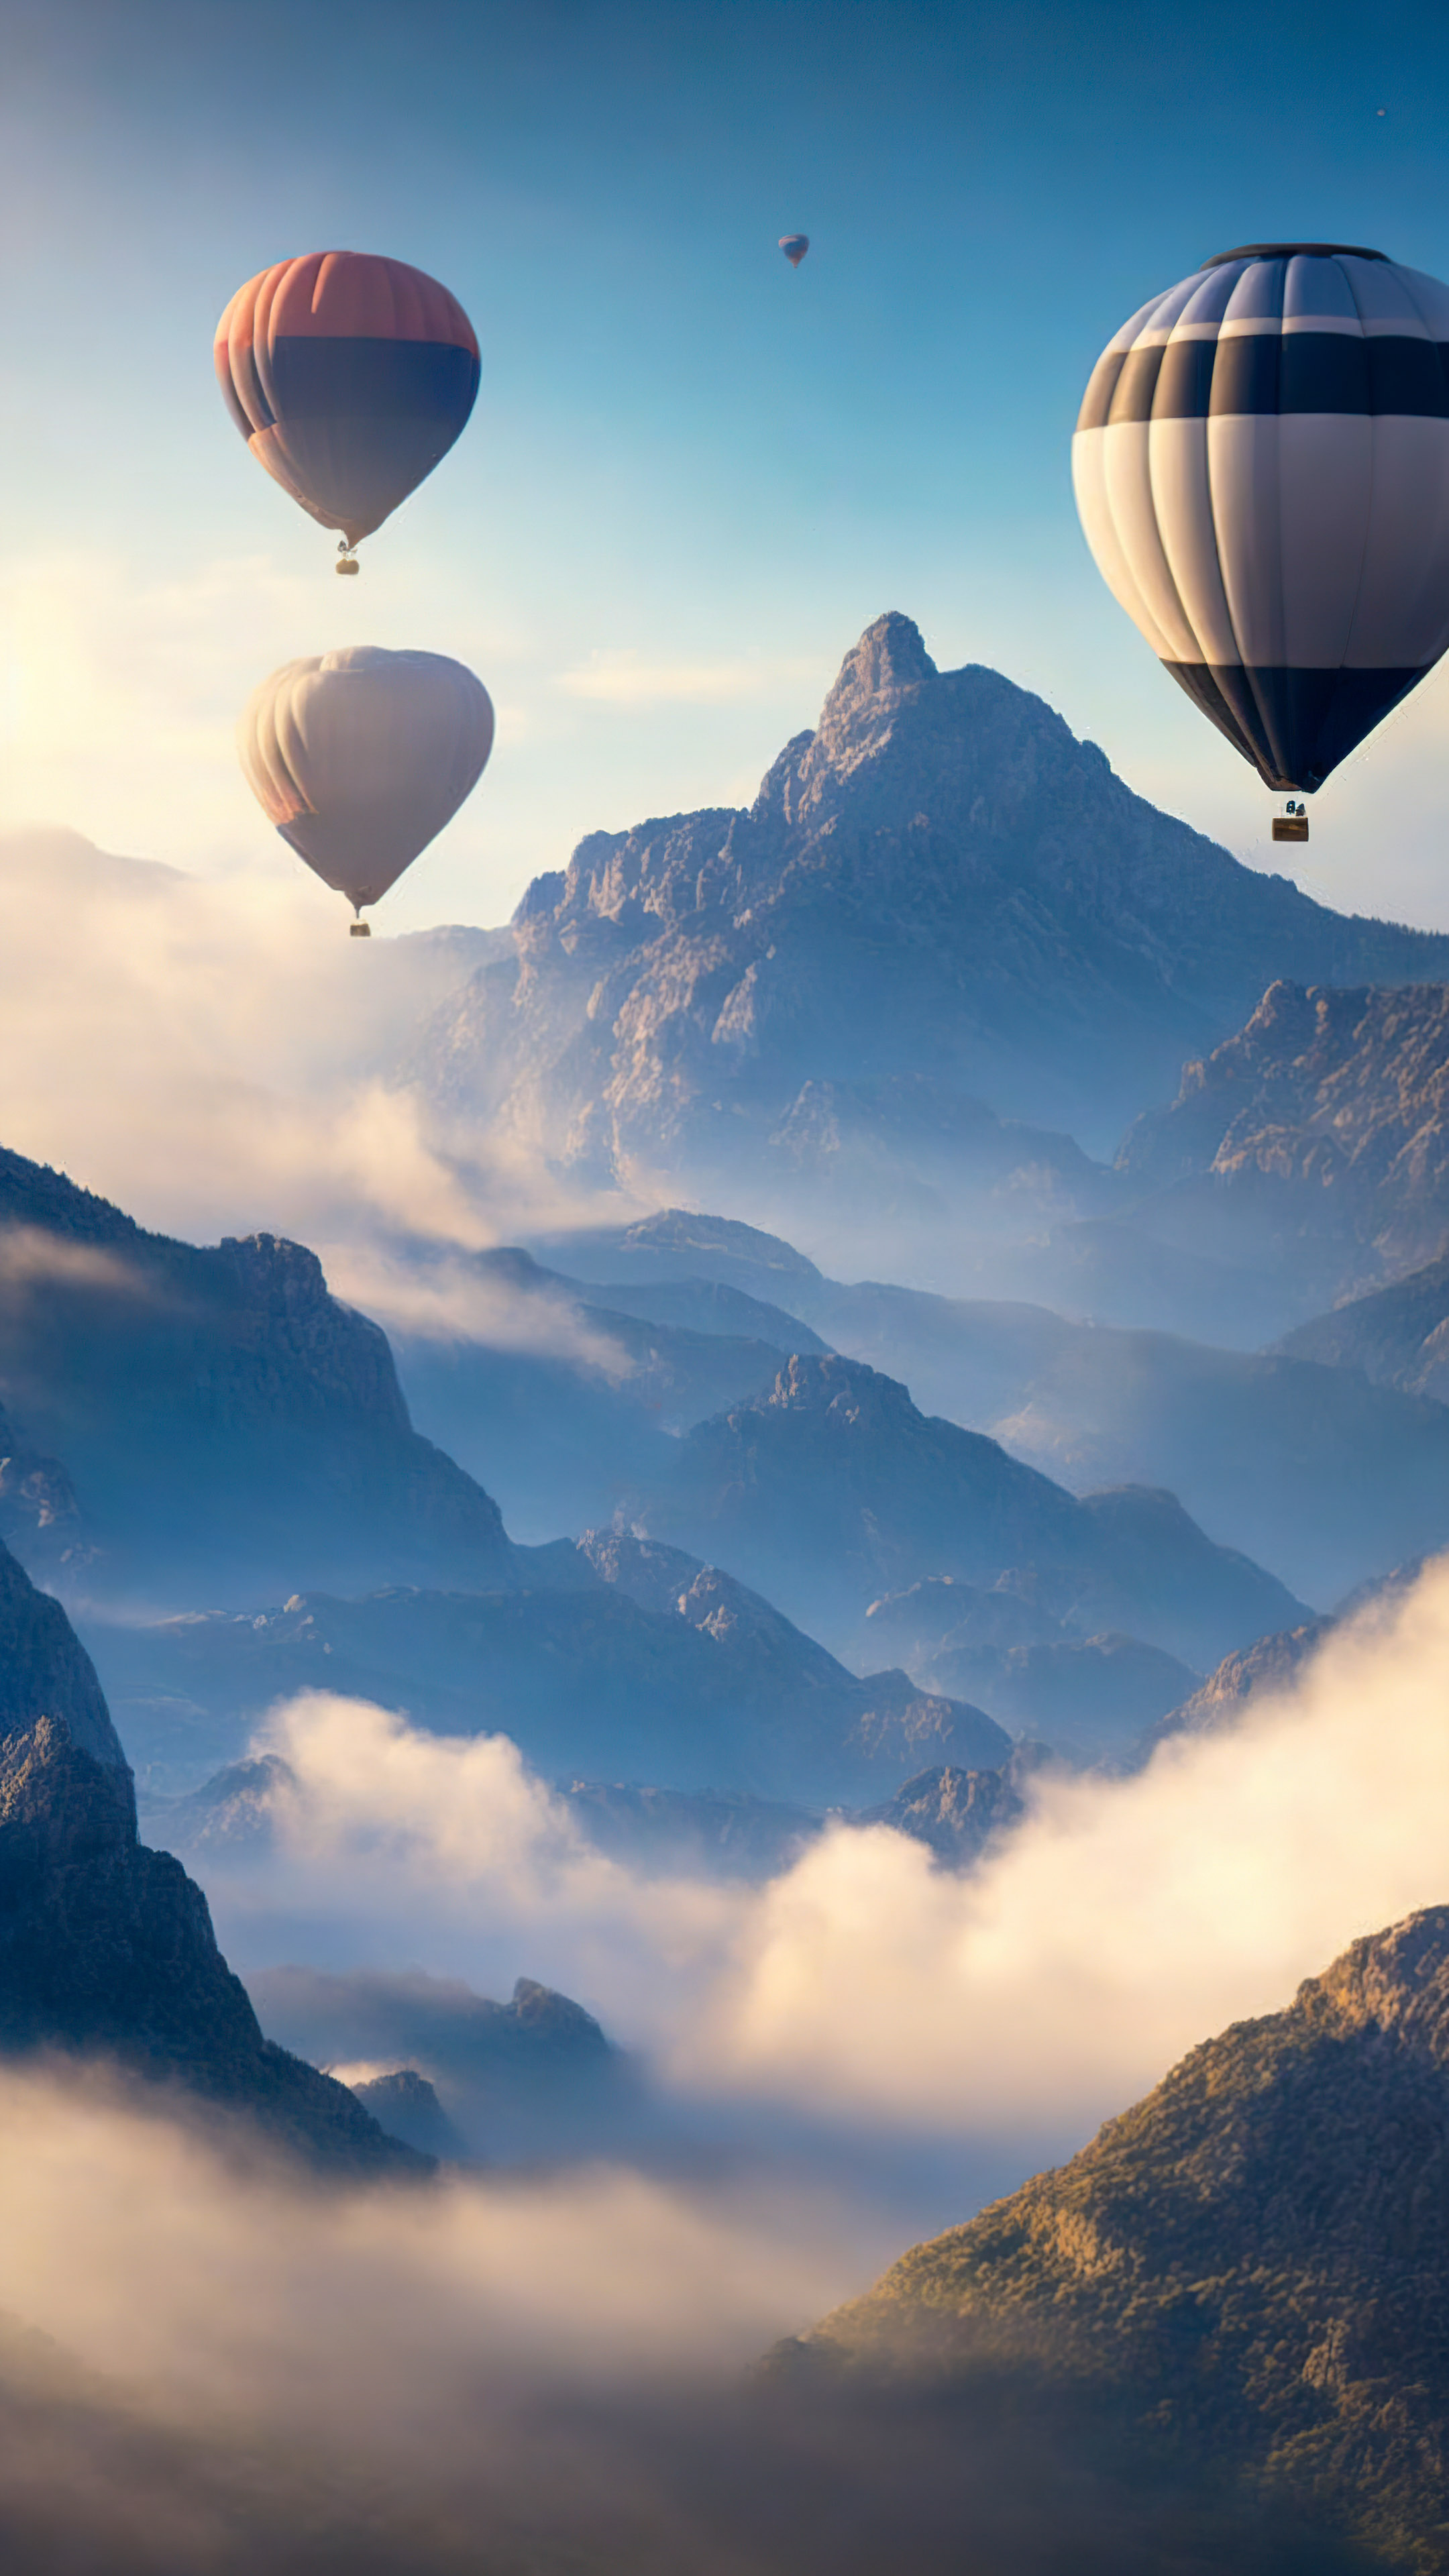 Get a surreal perspective with our landscape wallpaper for iPhone, depicting a sky filled with hot air balloons drifting peacefully over a misty, mountainous landscape.